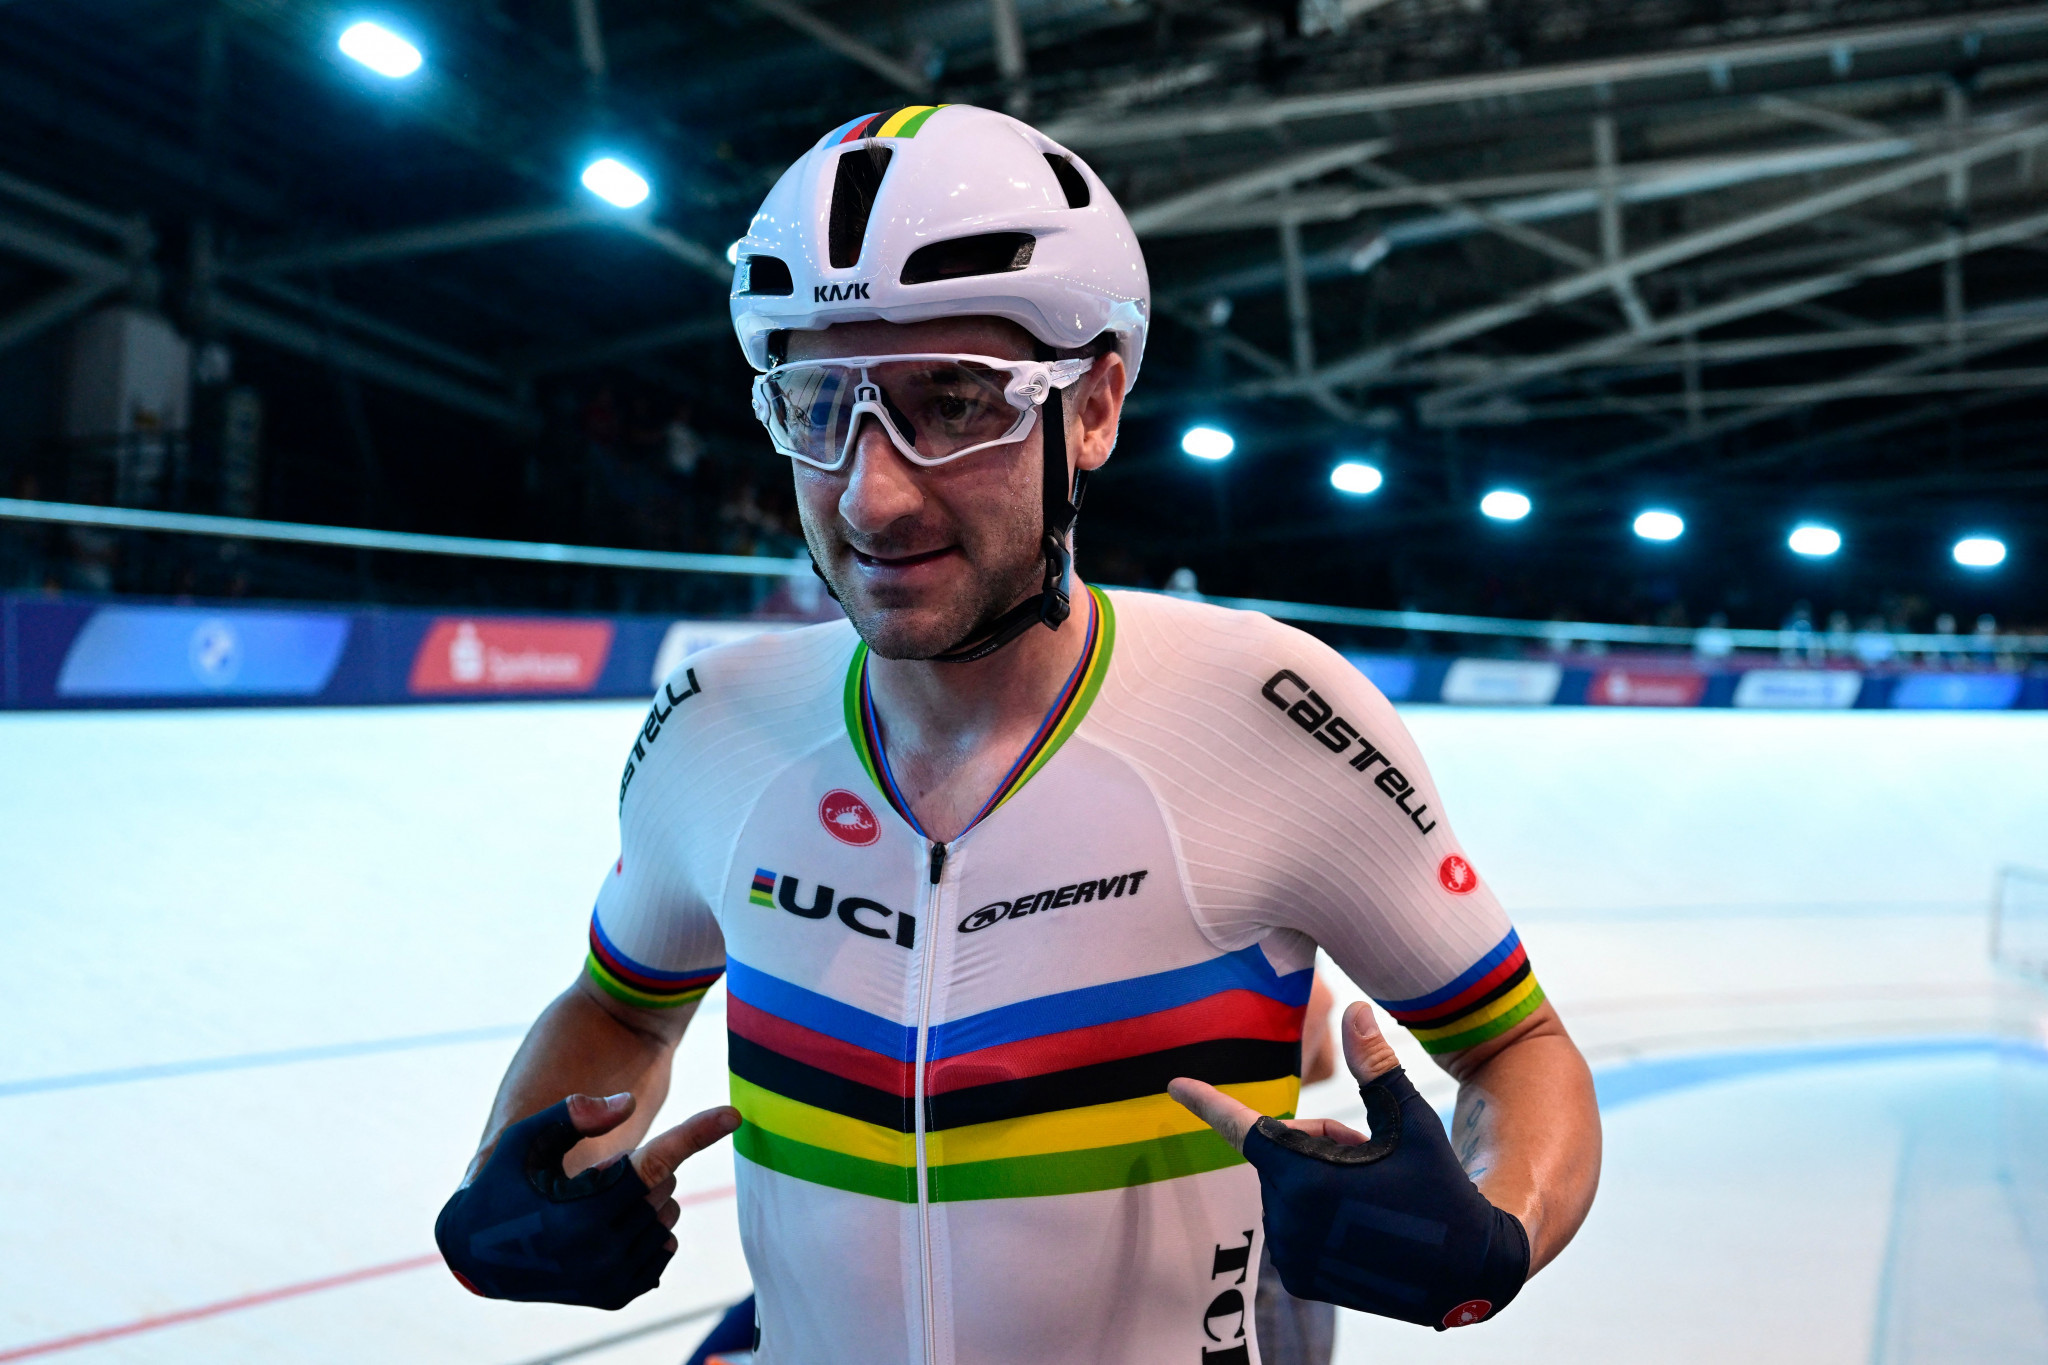 Reigning champions defend titles at 2022 Track Cycling World Championships